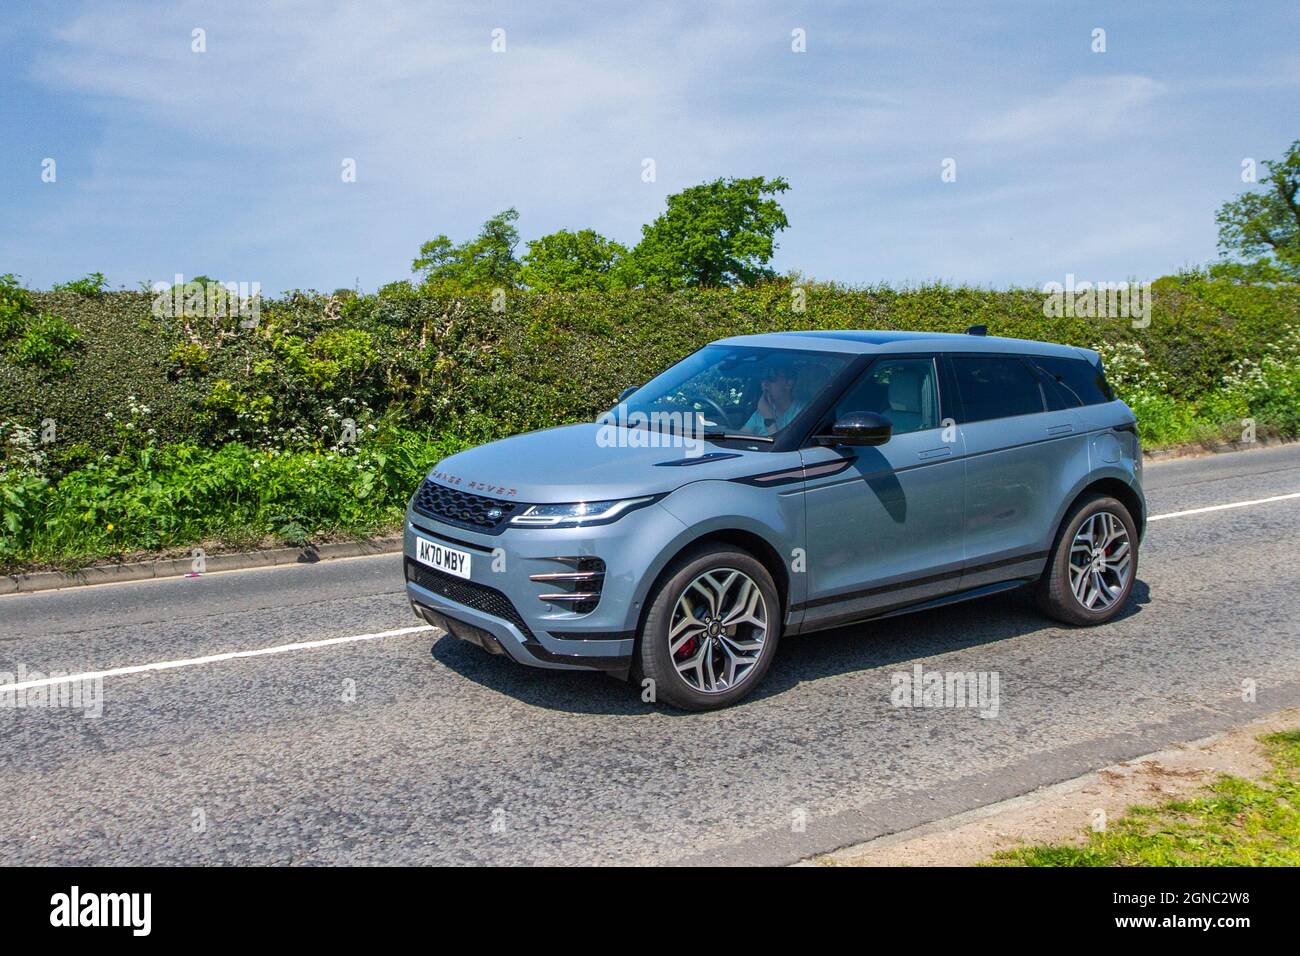 2021 grey Land Range Rover Evoque AB10 PHEV A R-Dynamic SE 1.5-litre three-cylinder Ingenium petrol engine car en-route to Capesthorne Hall classic May car show, Cheshire, UK Stock Photo